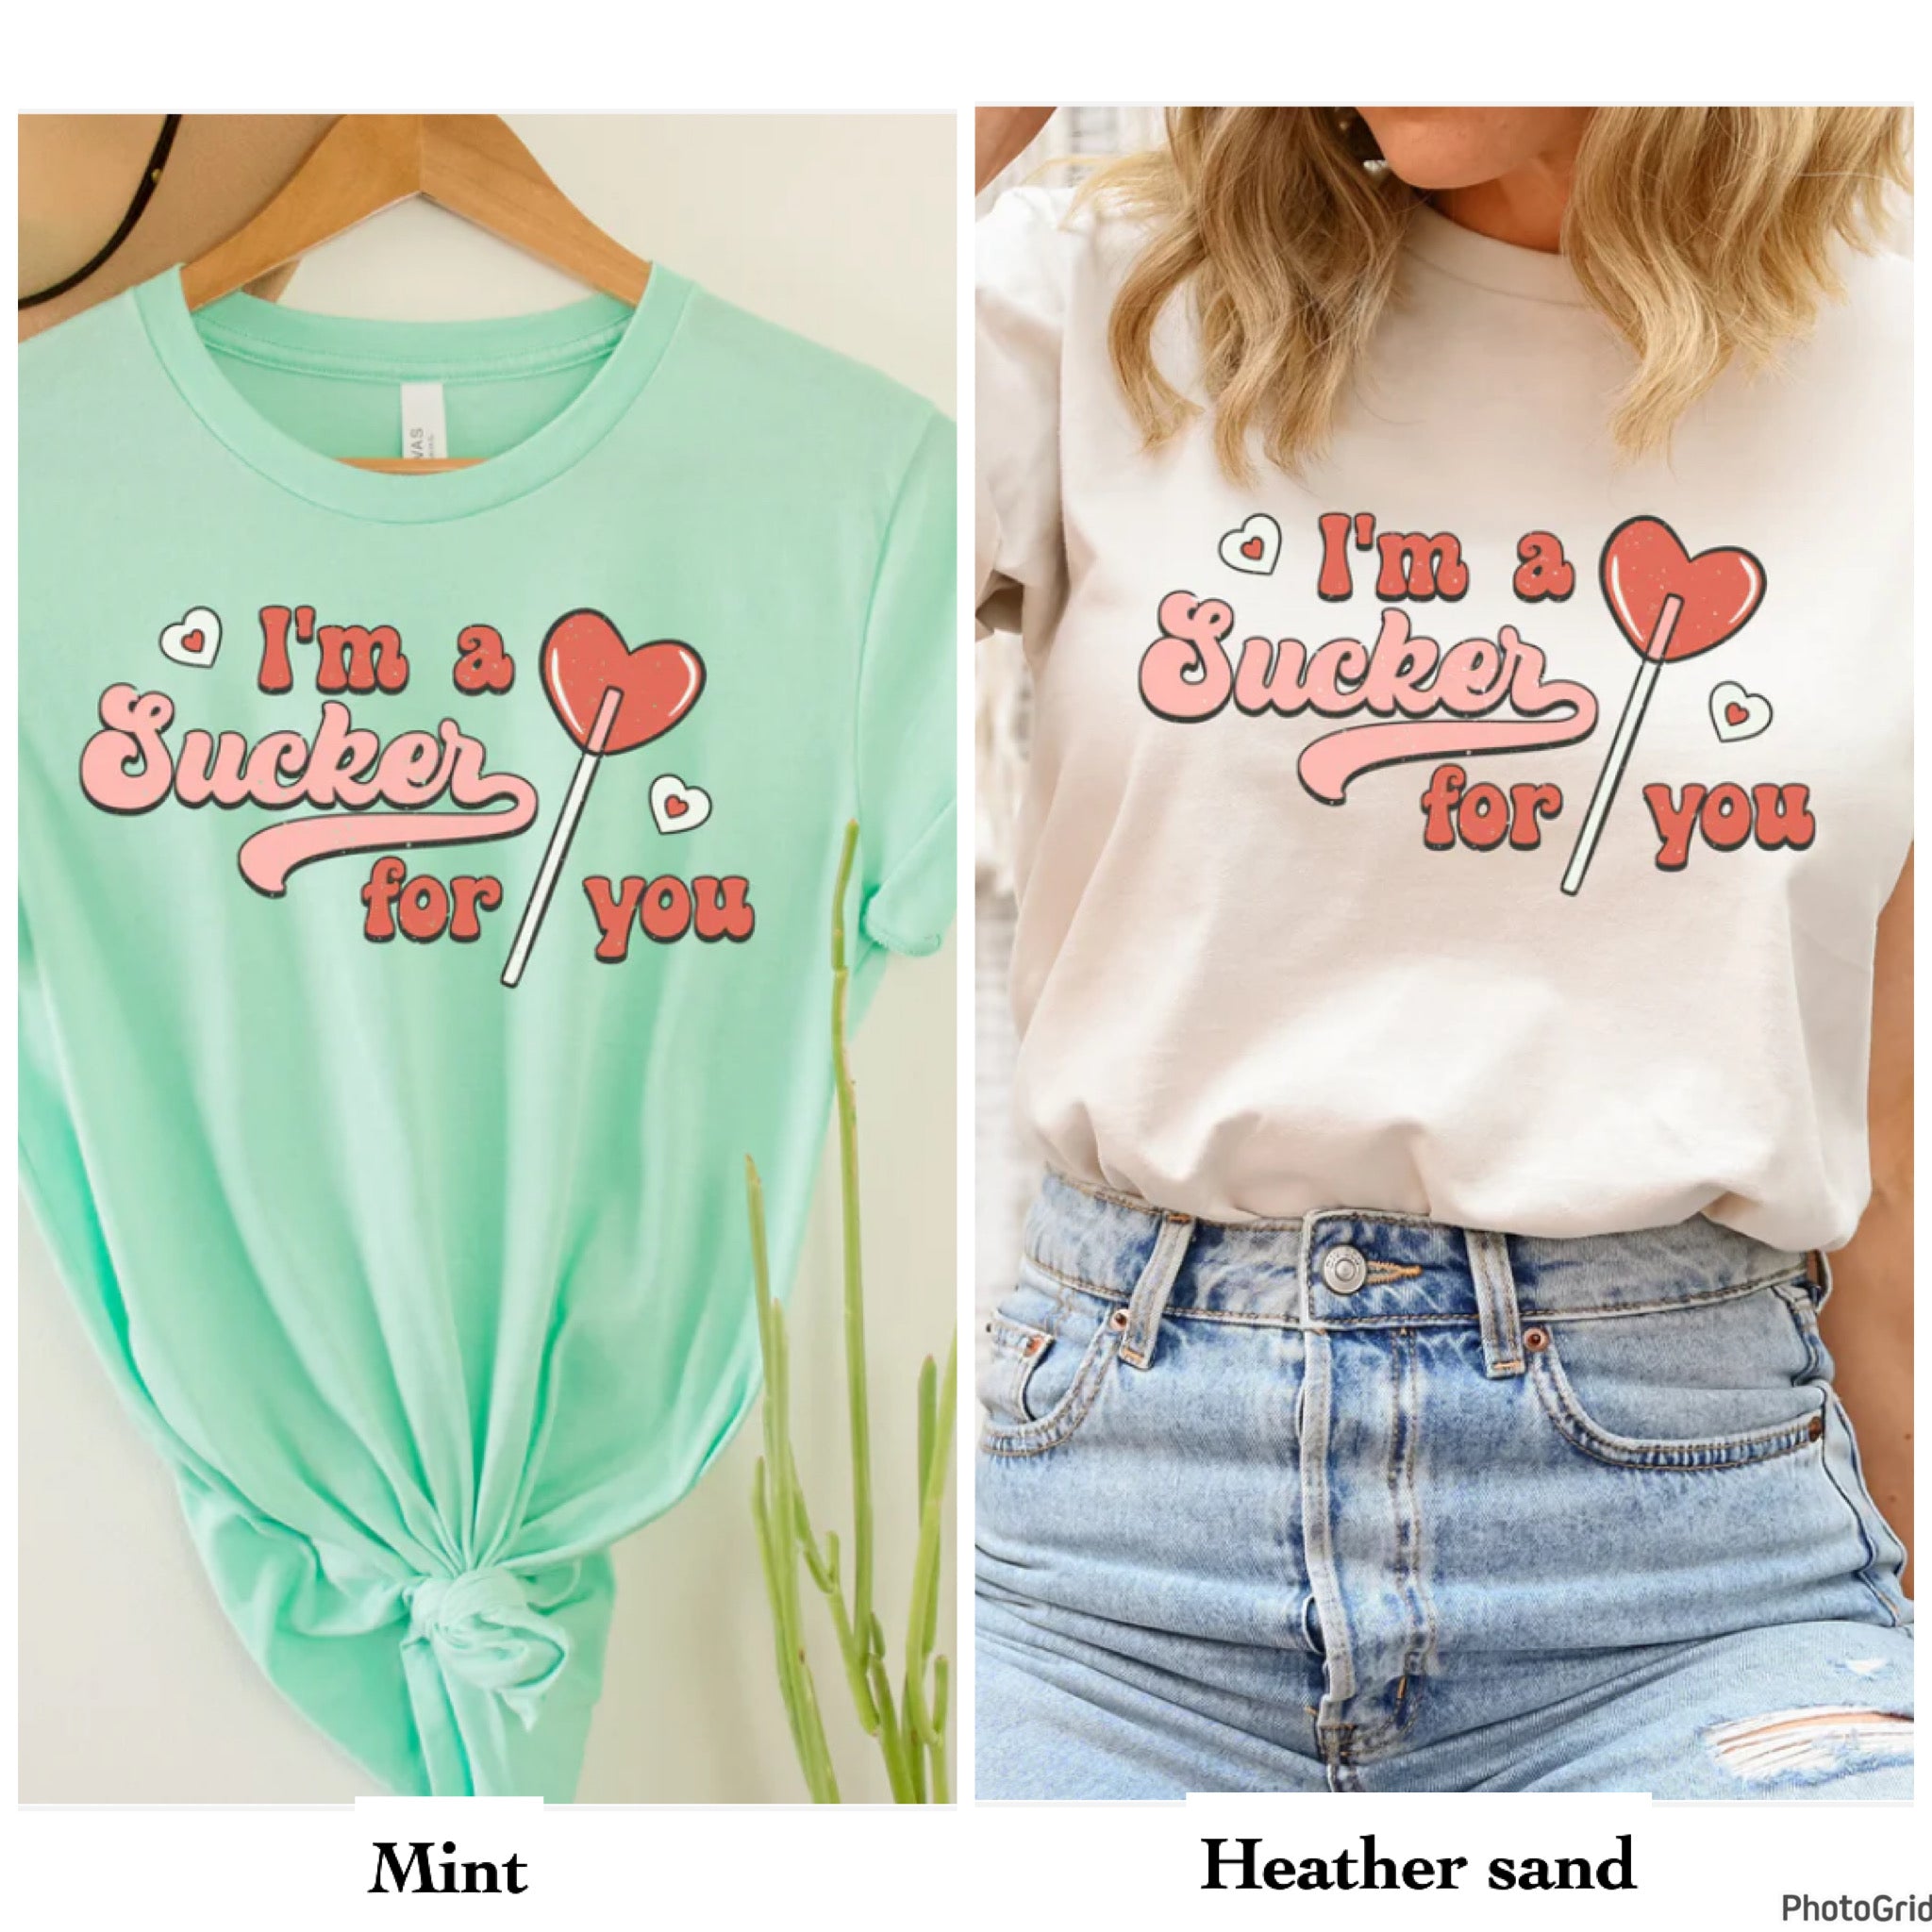 Im A Sucker For You tee